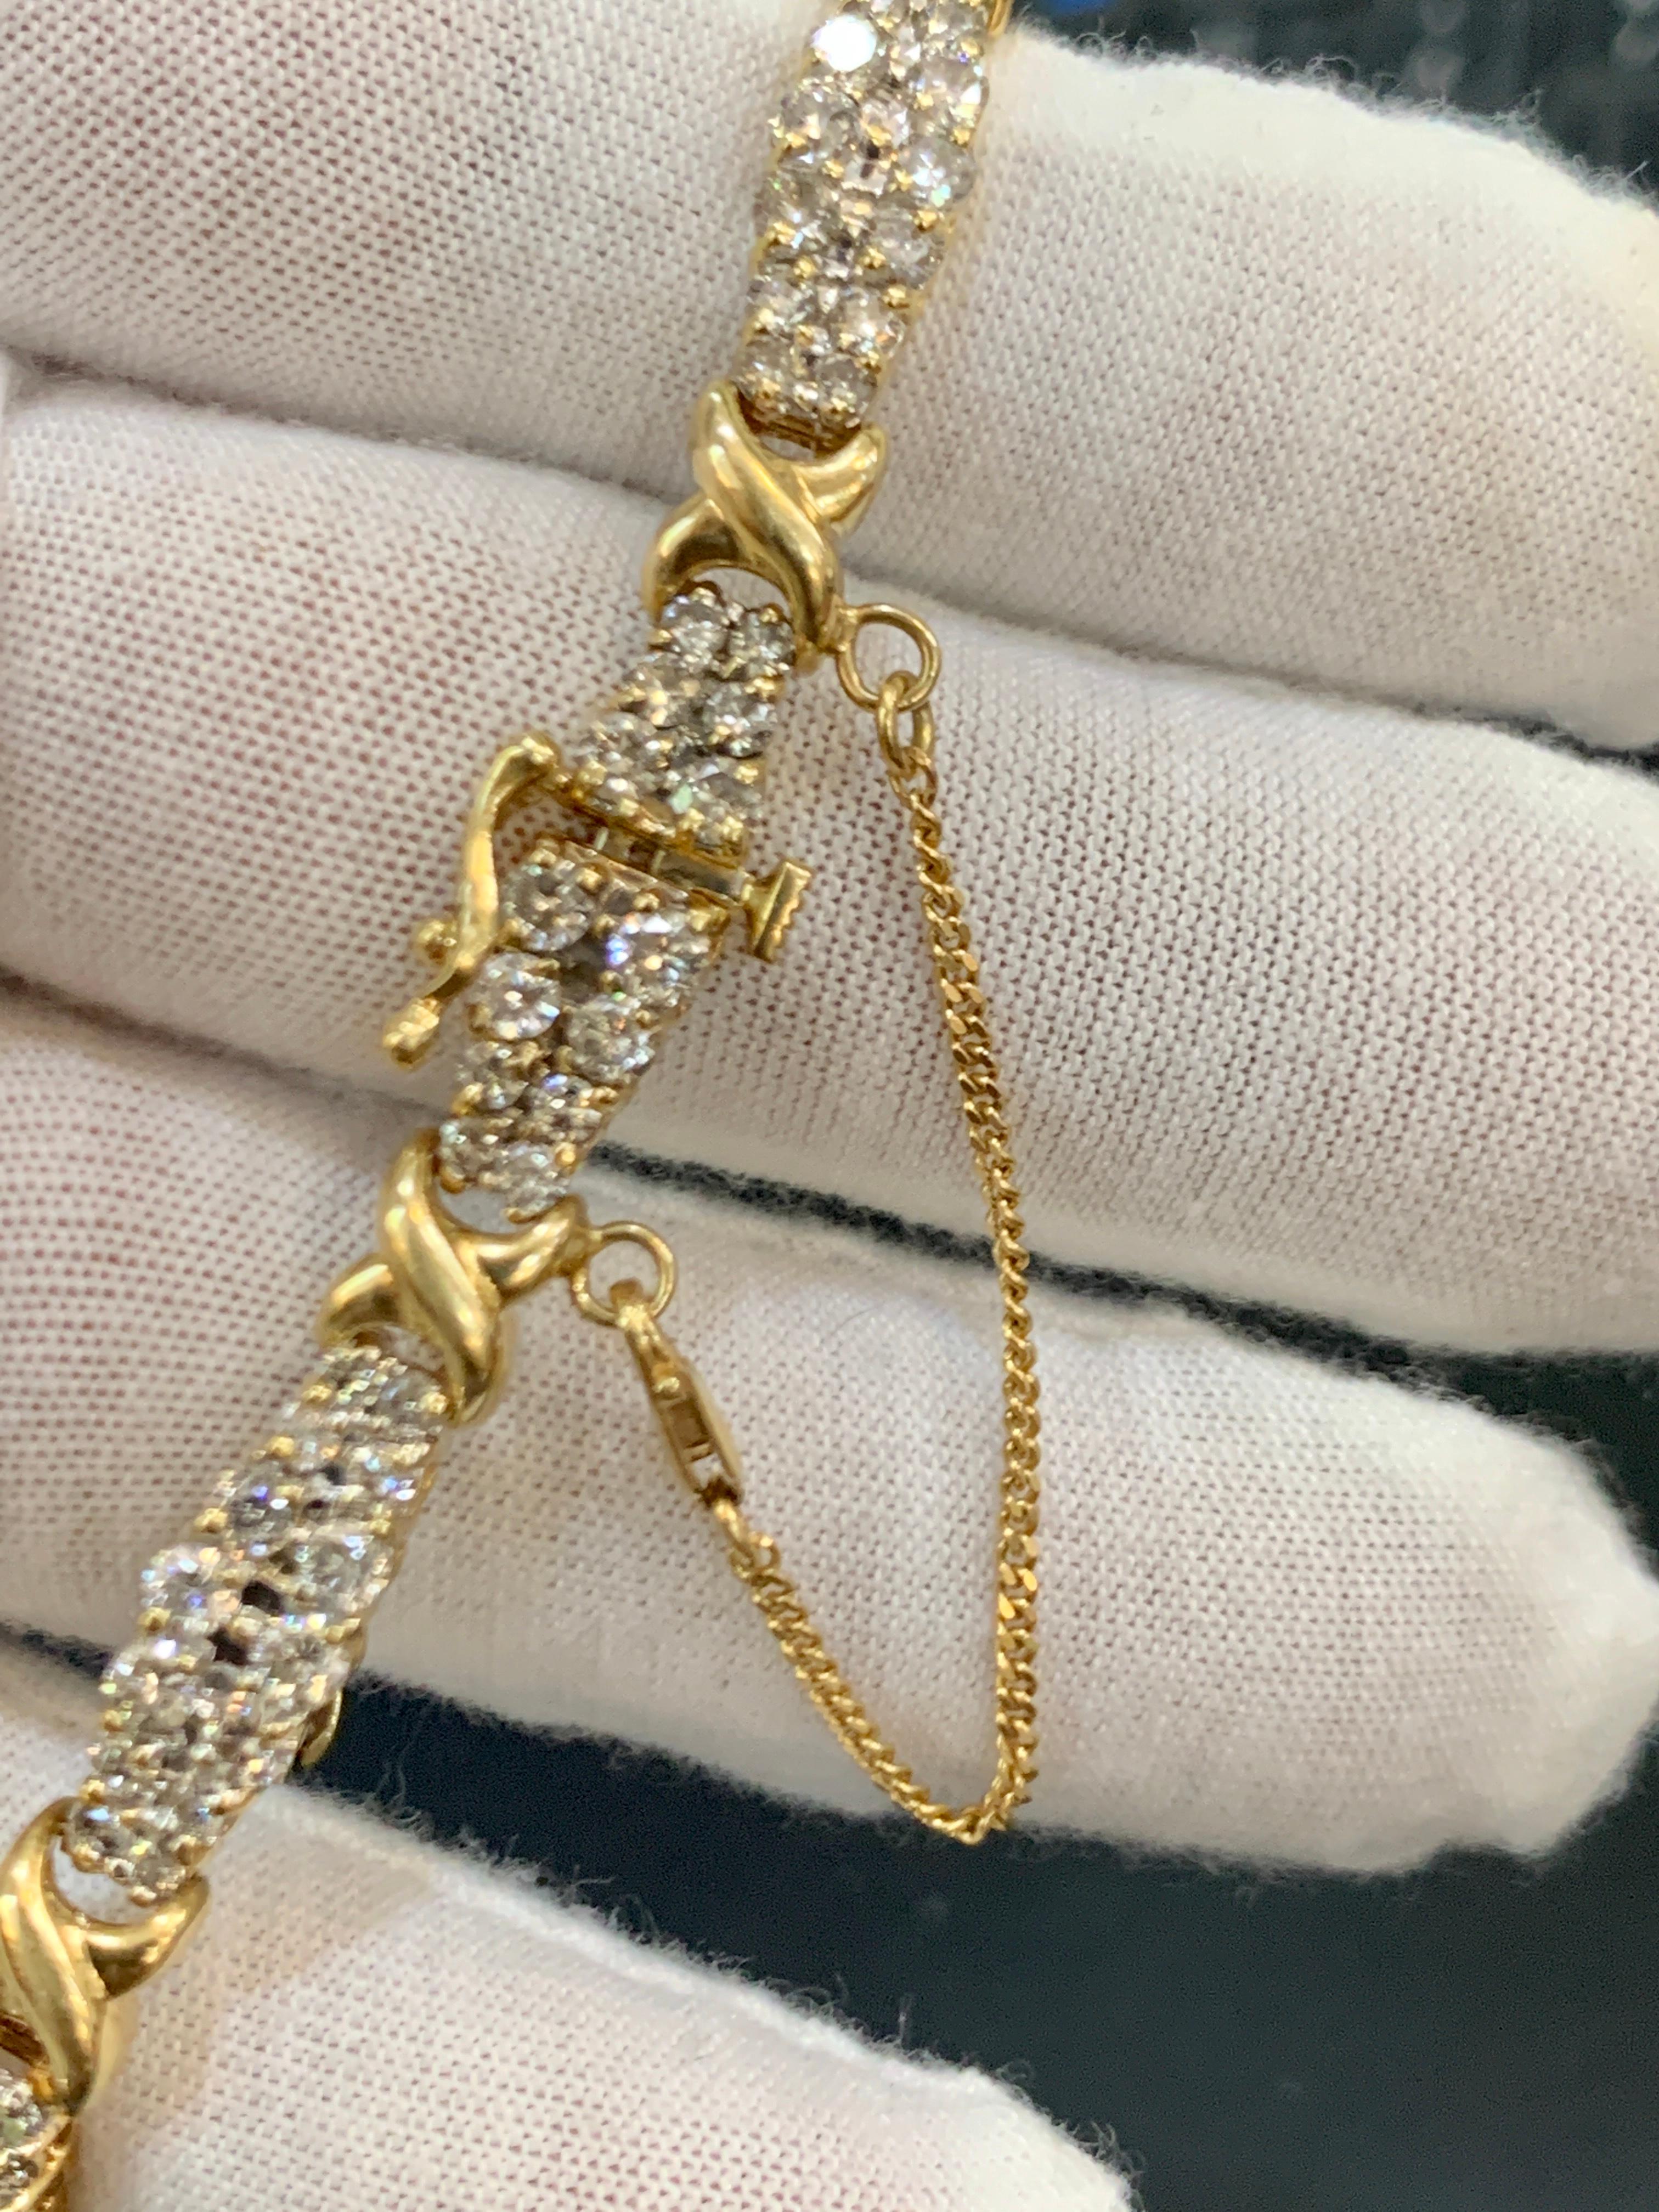 112 Diamond 5 Carat Bracelet ,14 Karat Yellow Gold 17.7 Gm Estate, Secured Chain
A statement of true, classic elegance, this 14 karat  Gold  Bracelet with Brilliant round  Diamond  from signature collection. The interlocking gold links, in between